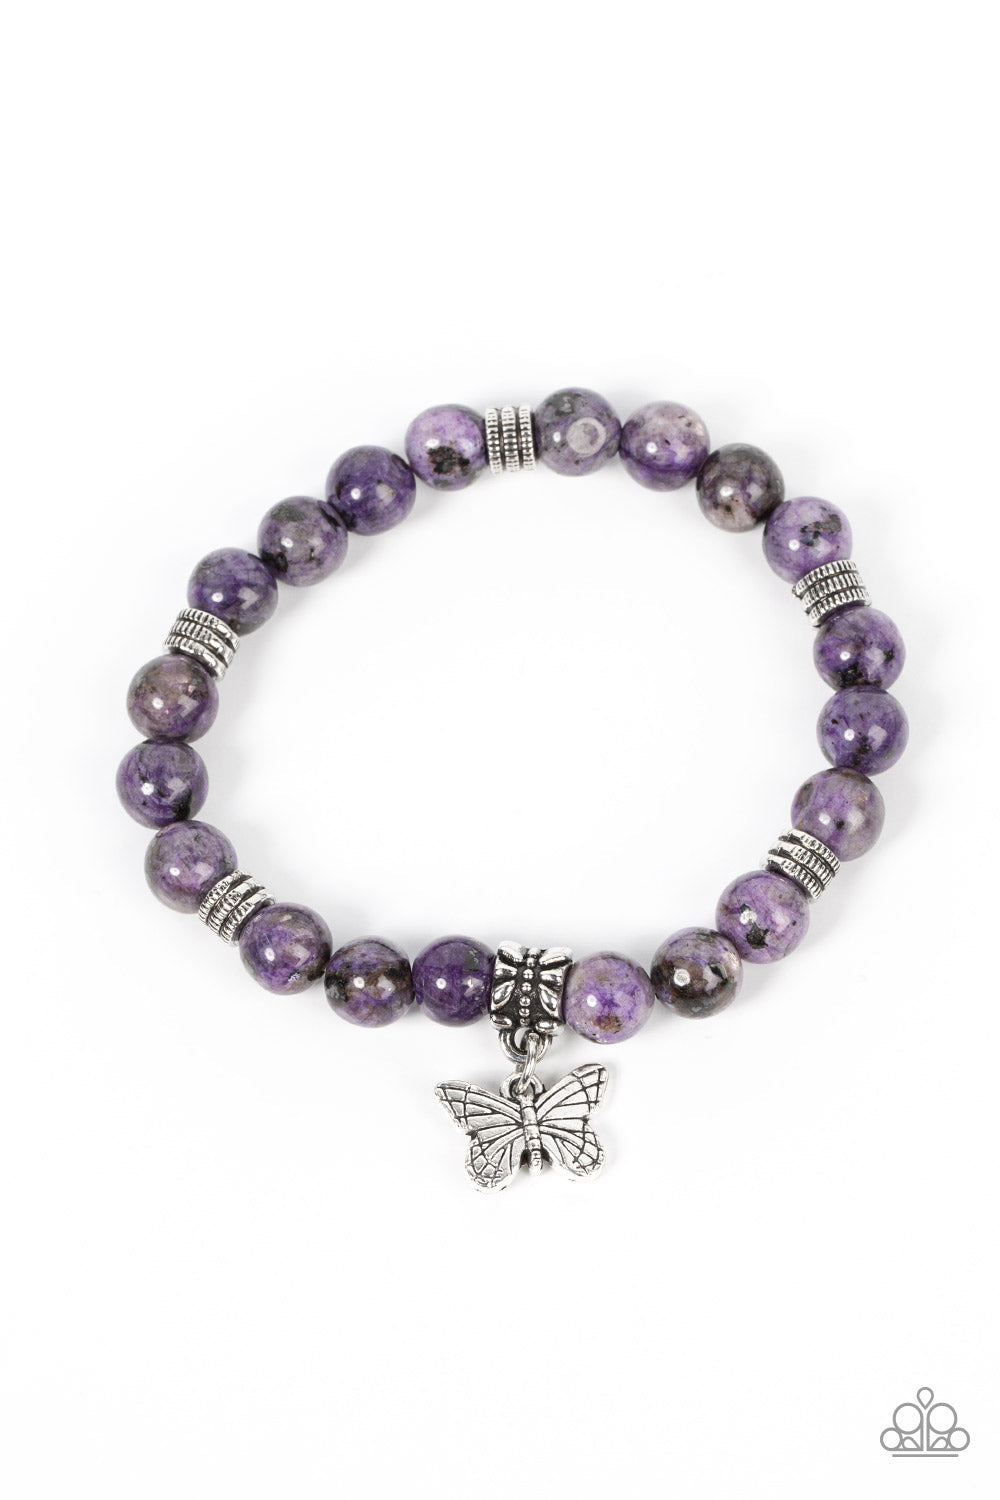 Butterfly Nirvana - Purple Amethyst - Silver Charm - Stretchy Bracelet - Paparazzi Accessories - silver butterfly charm, textured silver accents and amethyst stone beads are threaded along stretchy bands around the wrist for a whimsical stylish fashion bracelet. Bejeweled Accessories By Kristie - Trendy fashion jewelry for everyone -